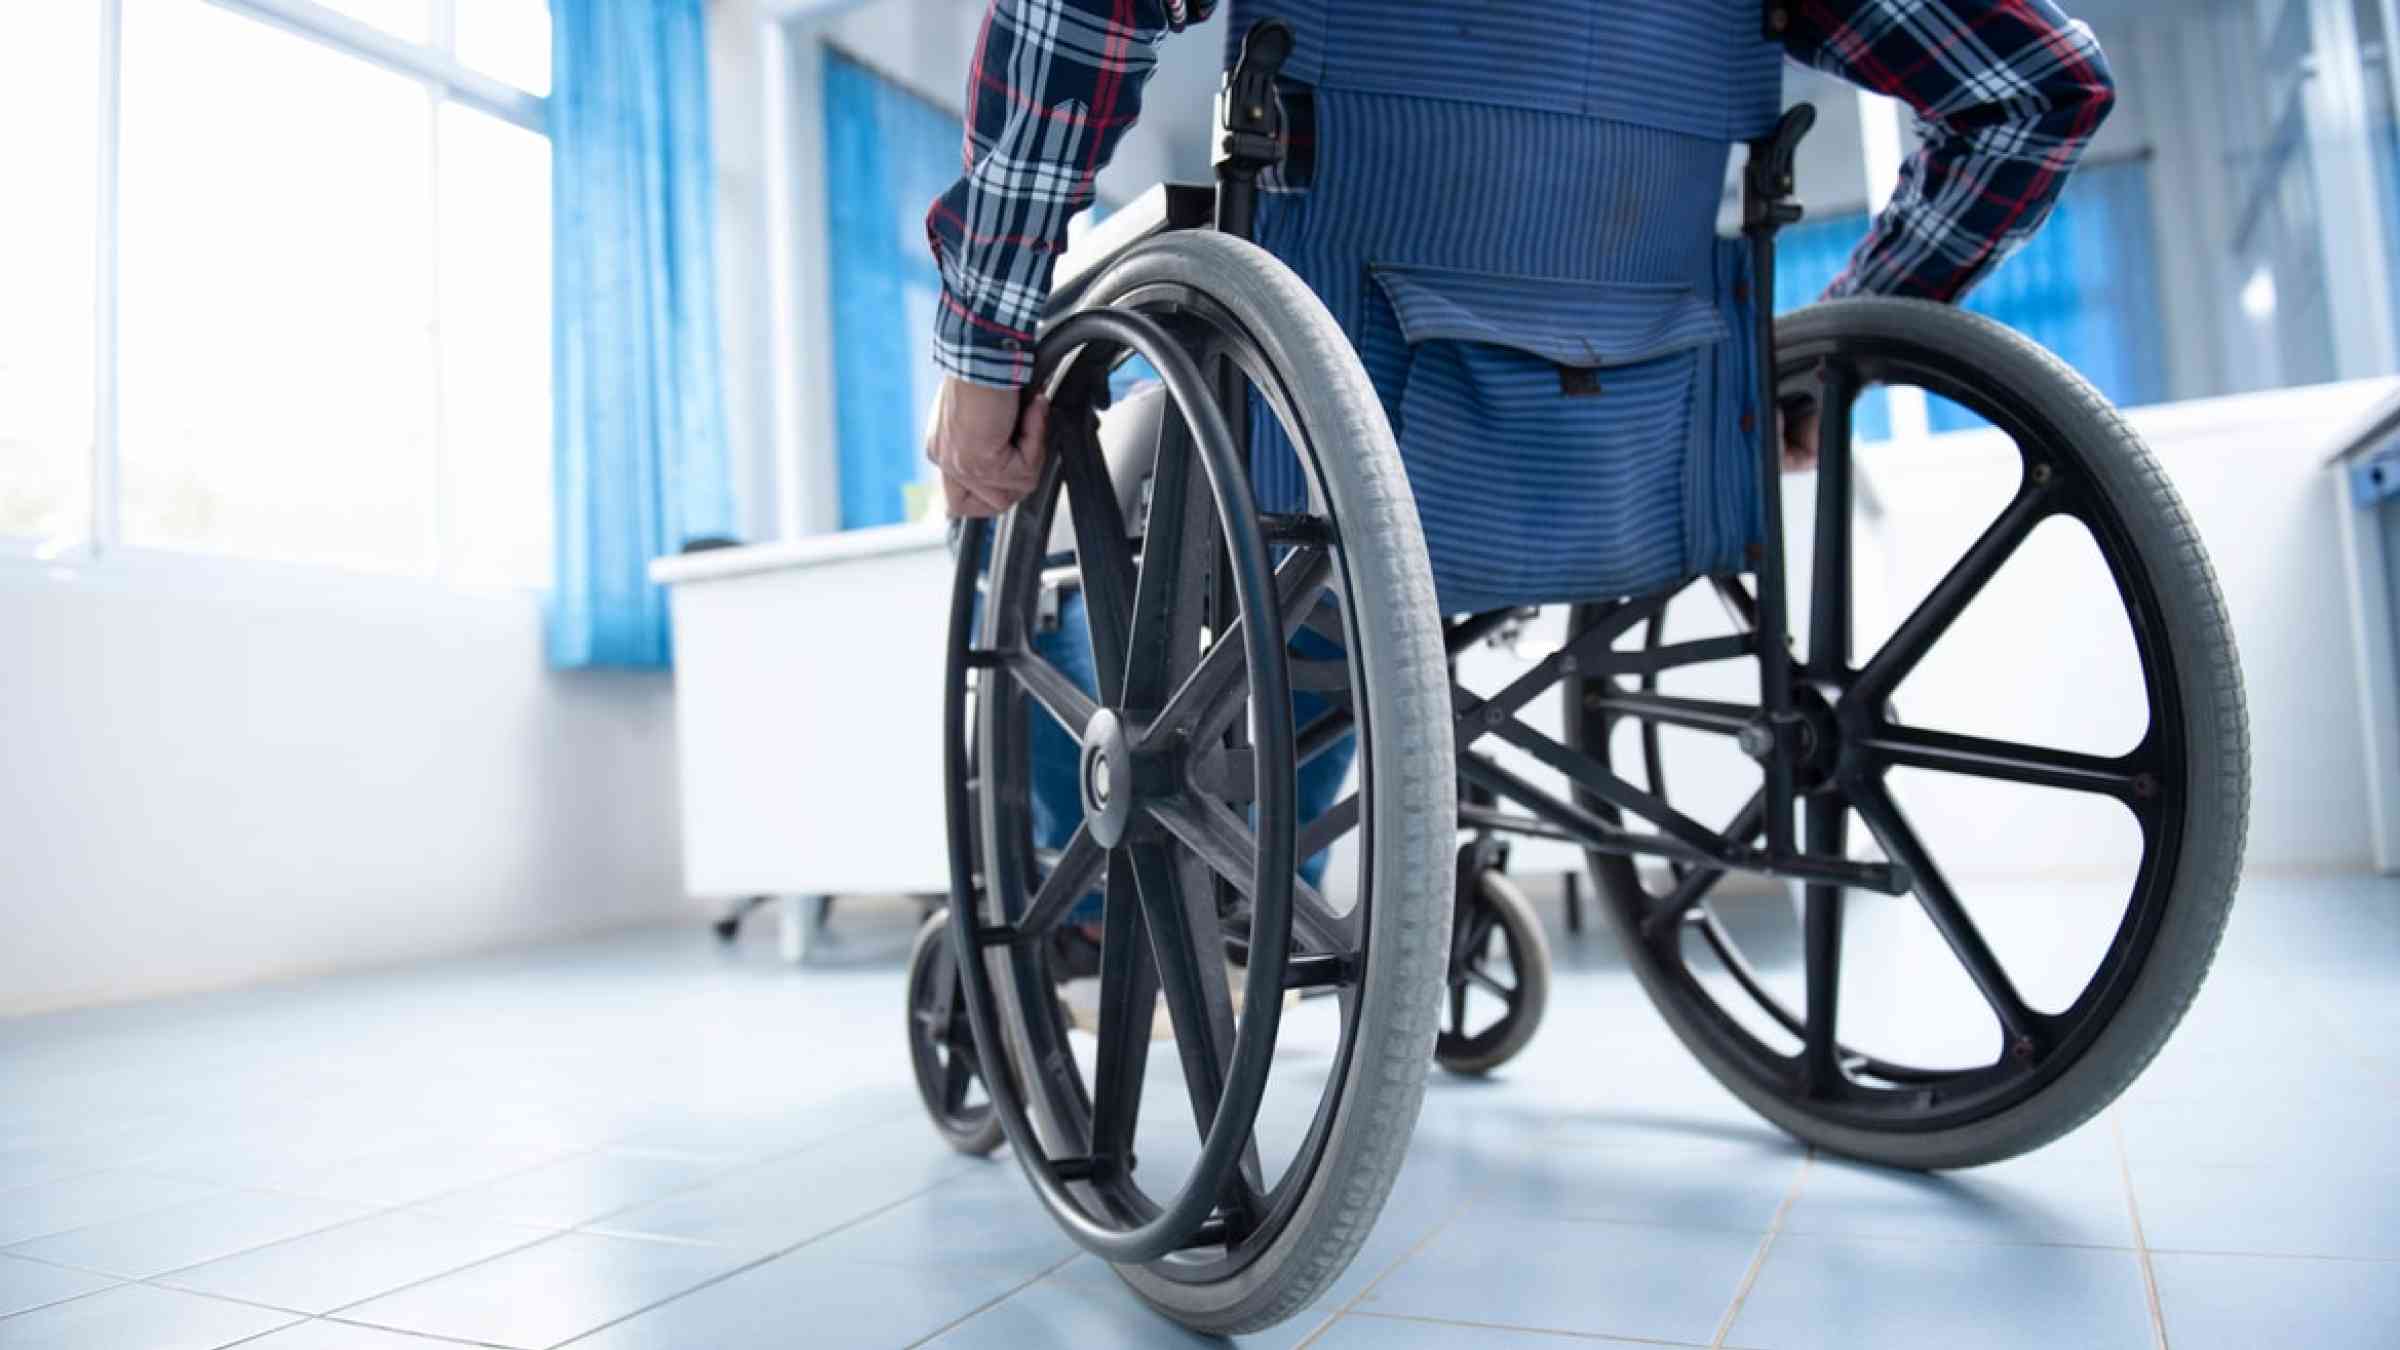 Disabled person on a wheelchair